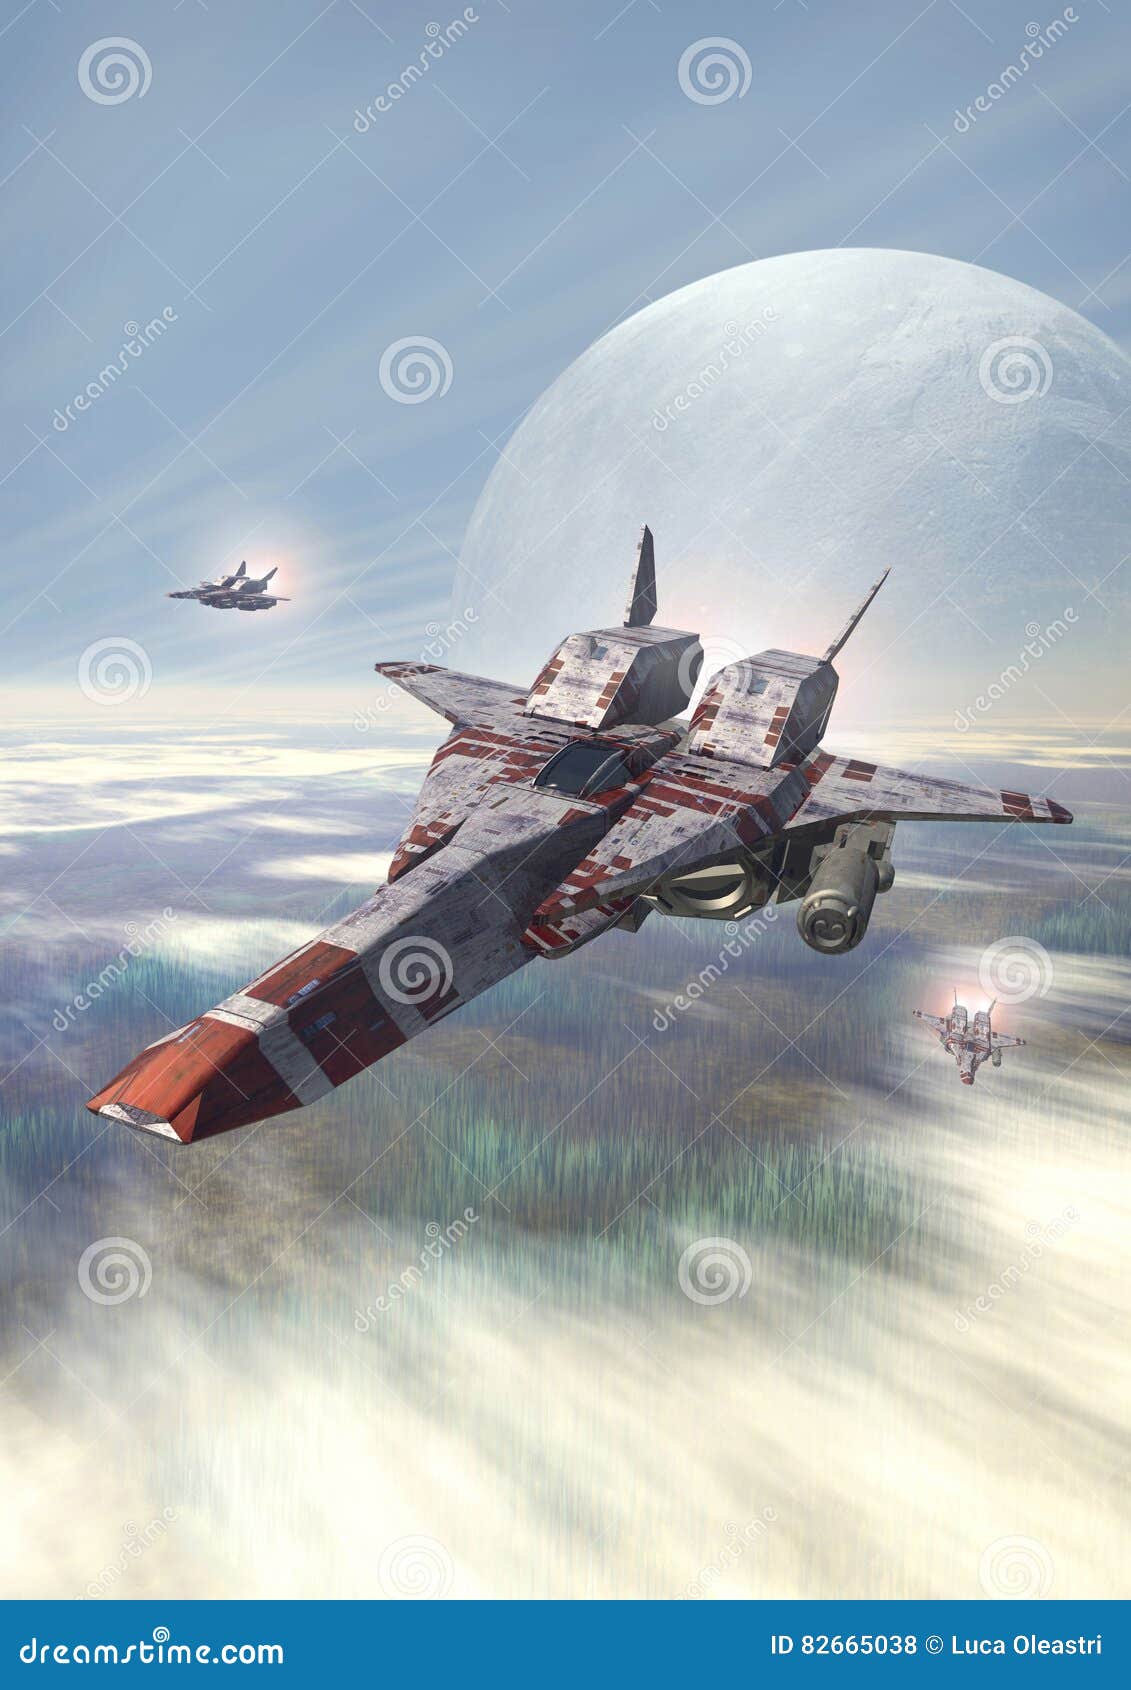 space fighter on patrol